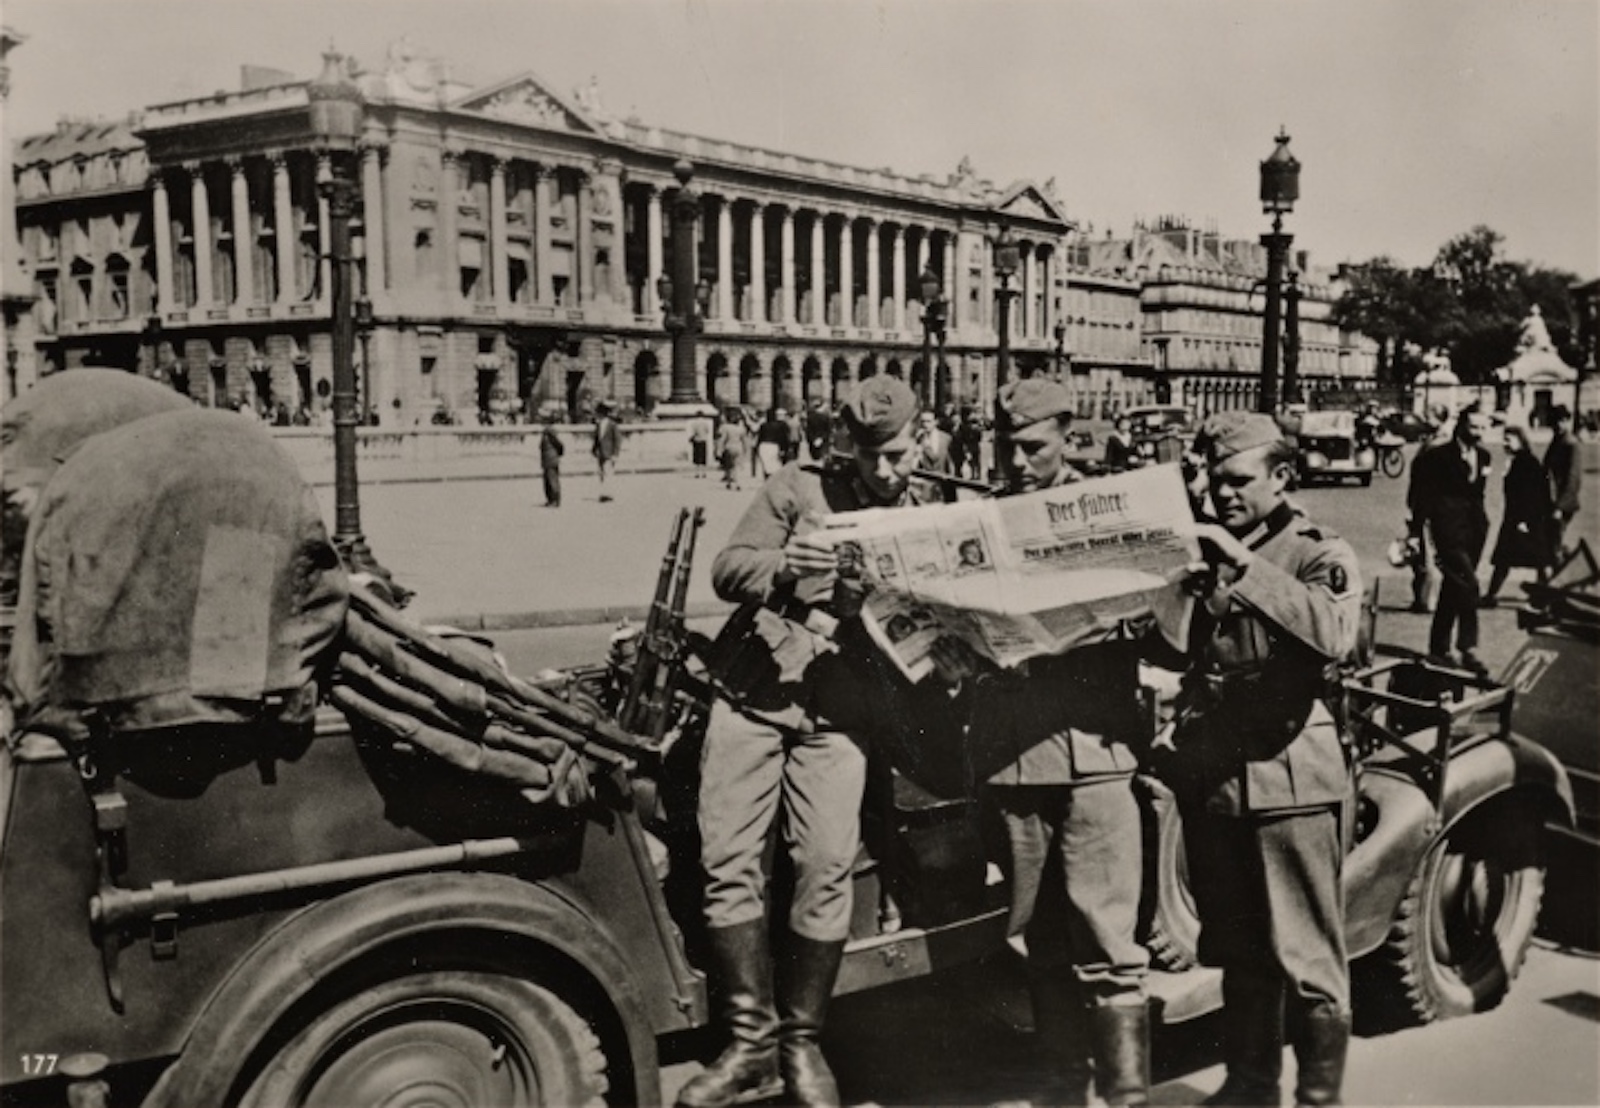 German soldiers studying a newspaper from home on the Place de la Concorde in Paris, 1940. New York Public Library. Public Domain.